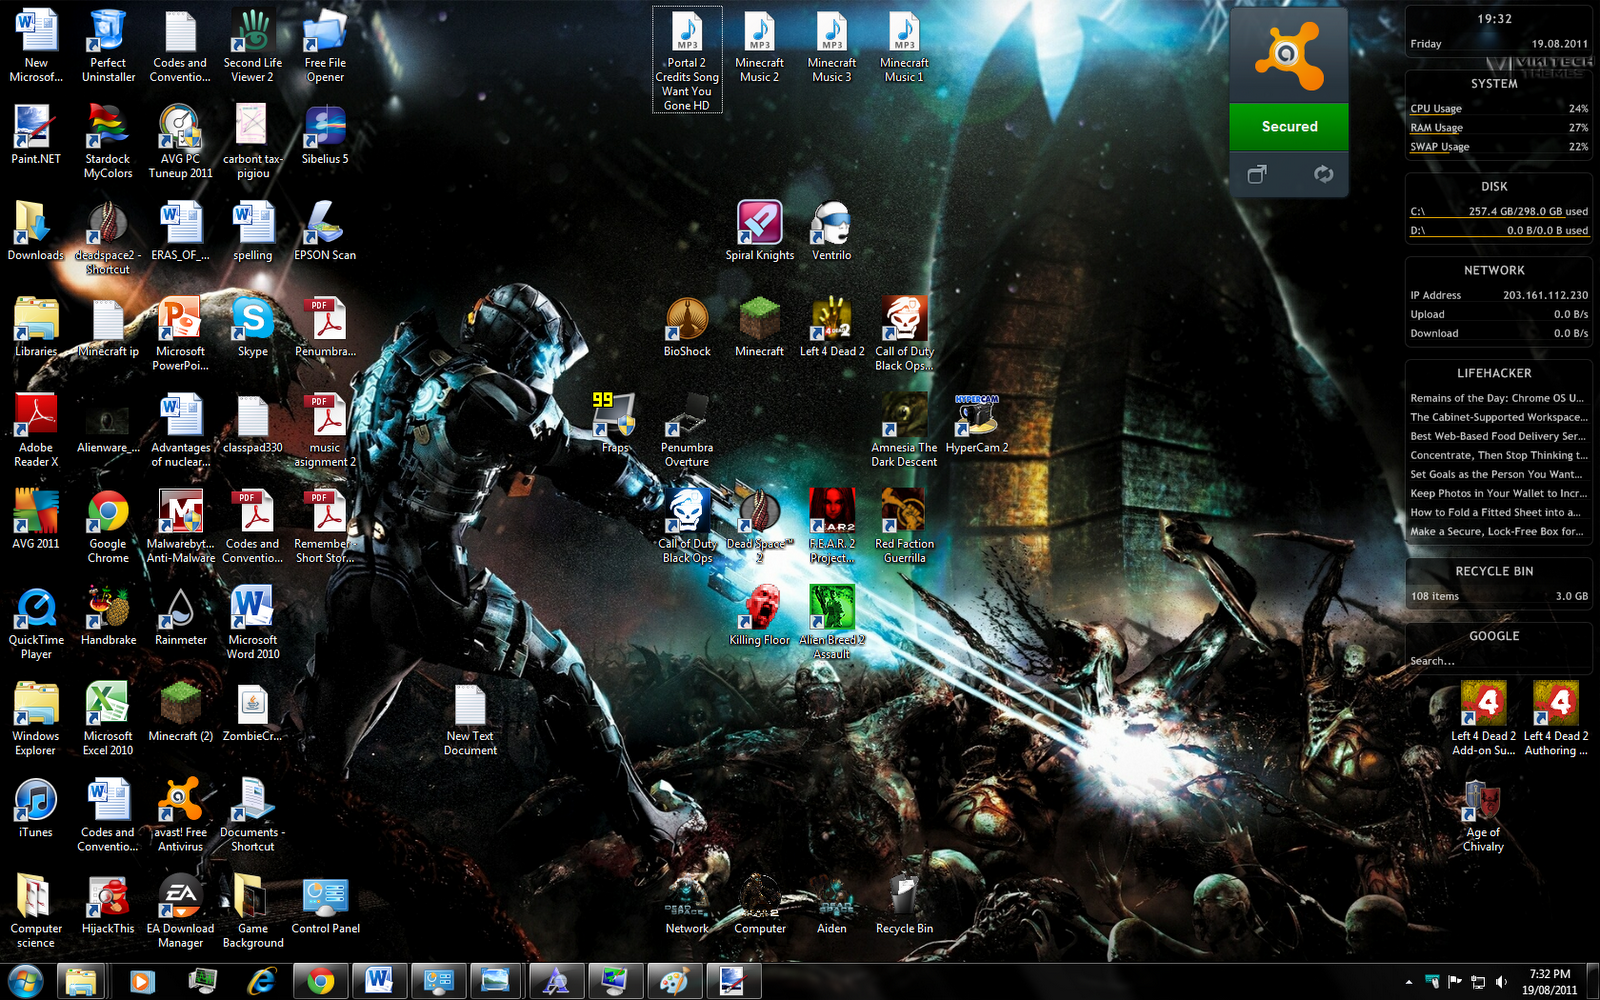 very best wallpaper,action adventure game,pc game,strategy video game,screenshot,digital compositing